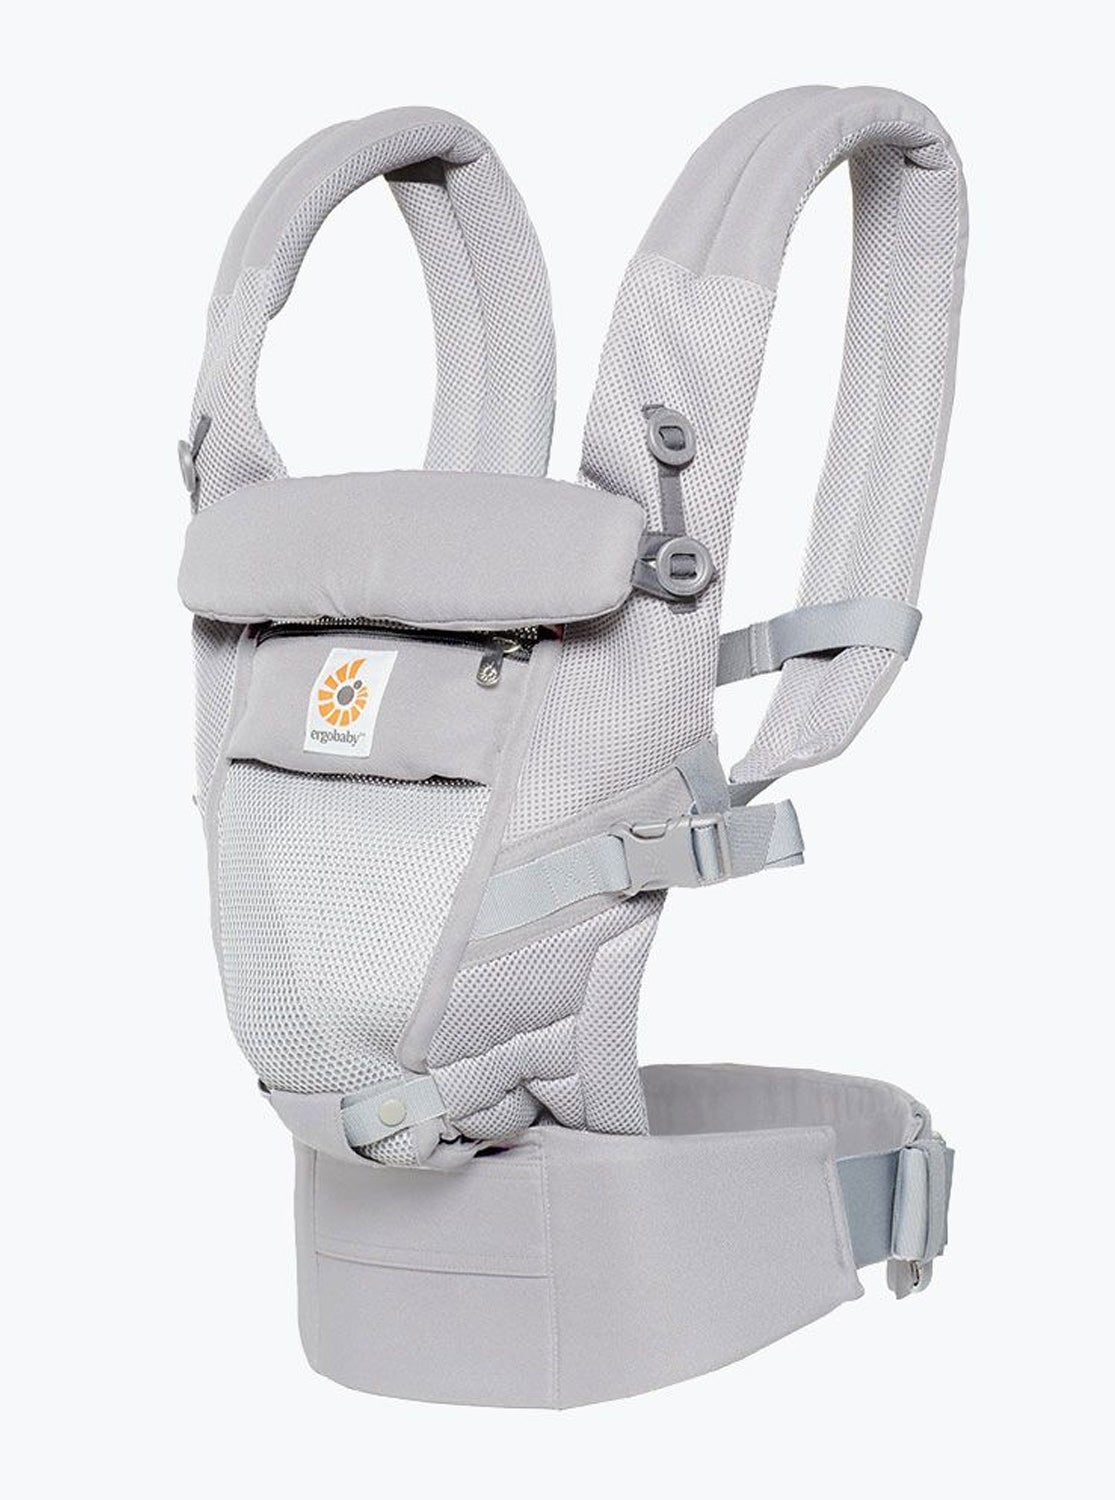 ERGOBABY Adapt Cool Air Mesh Baby Carrier - ANB Baby -$100 - $300